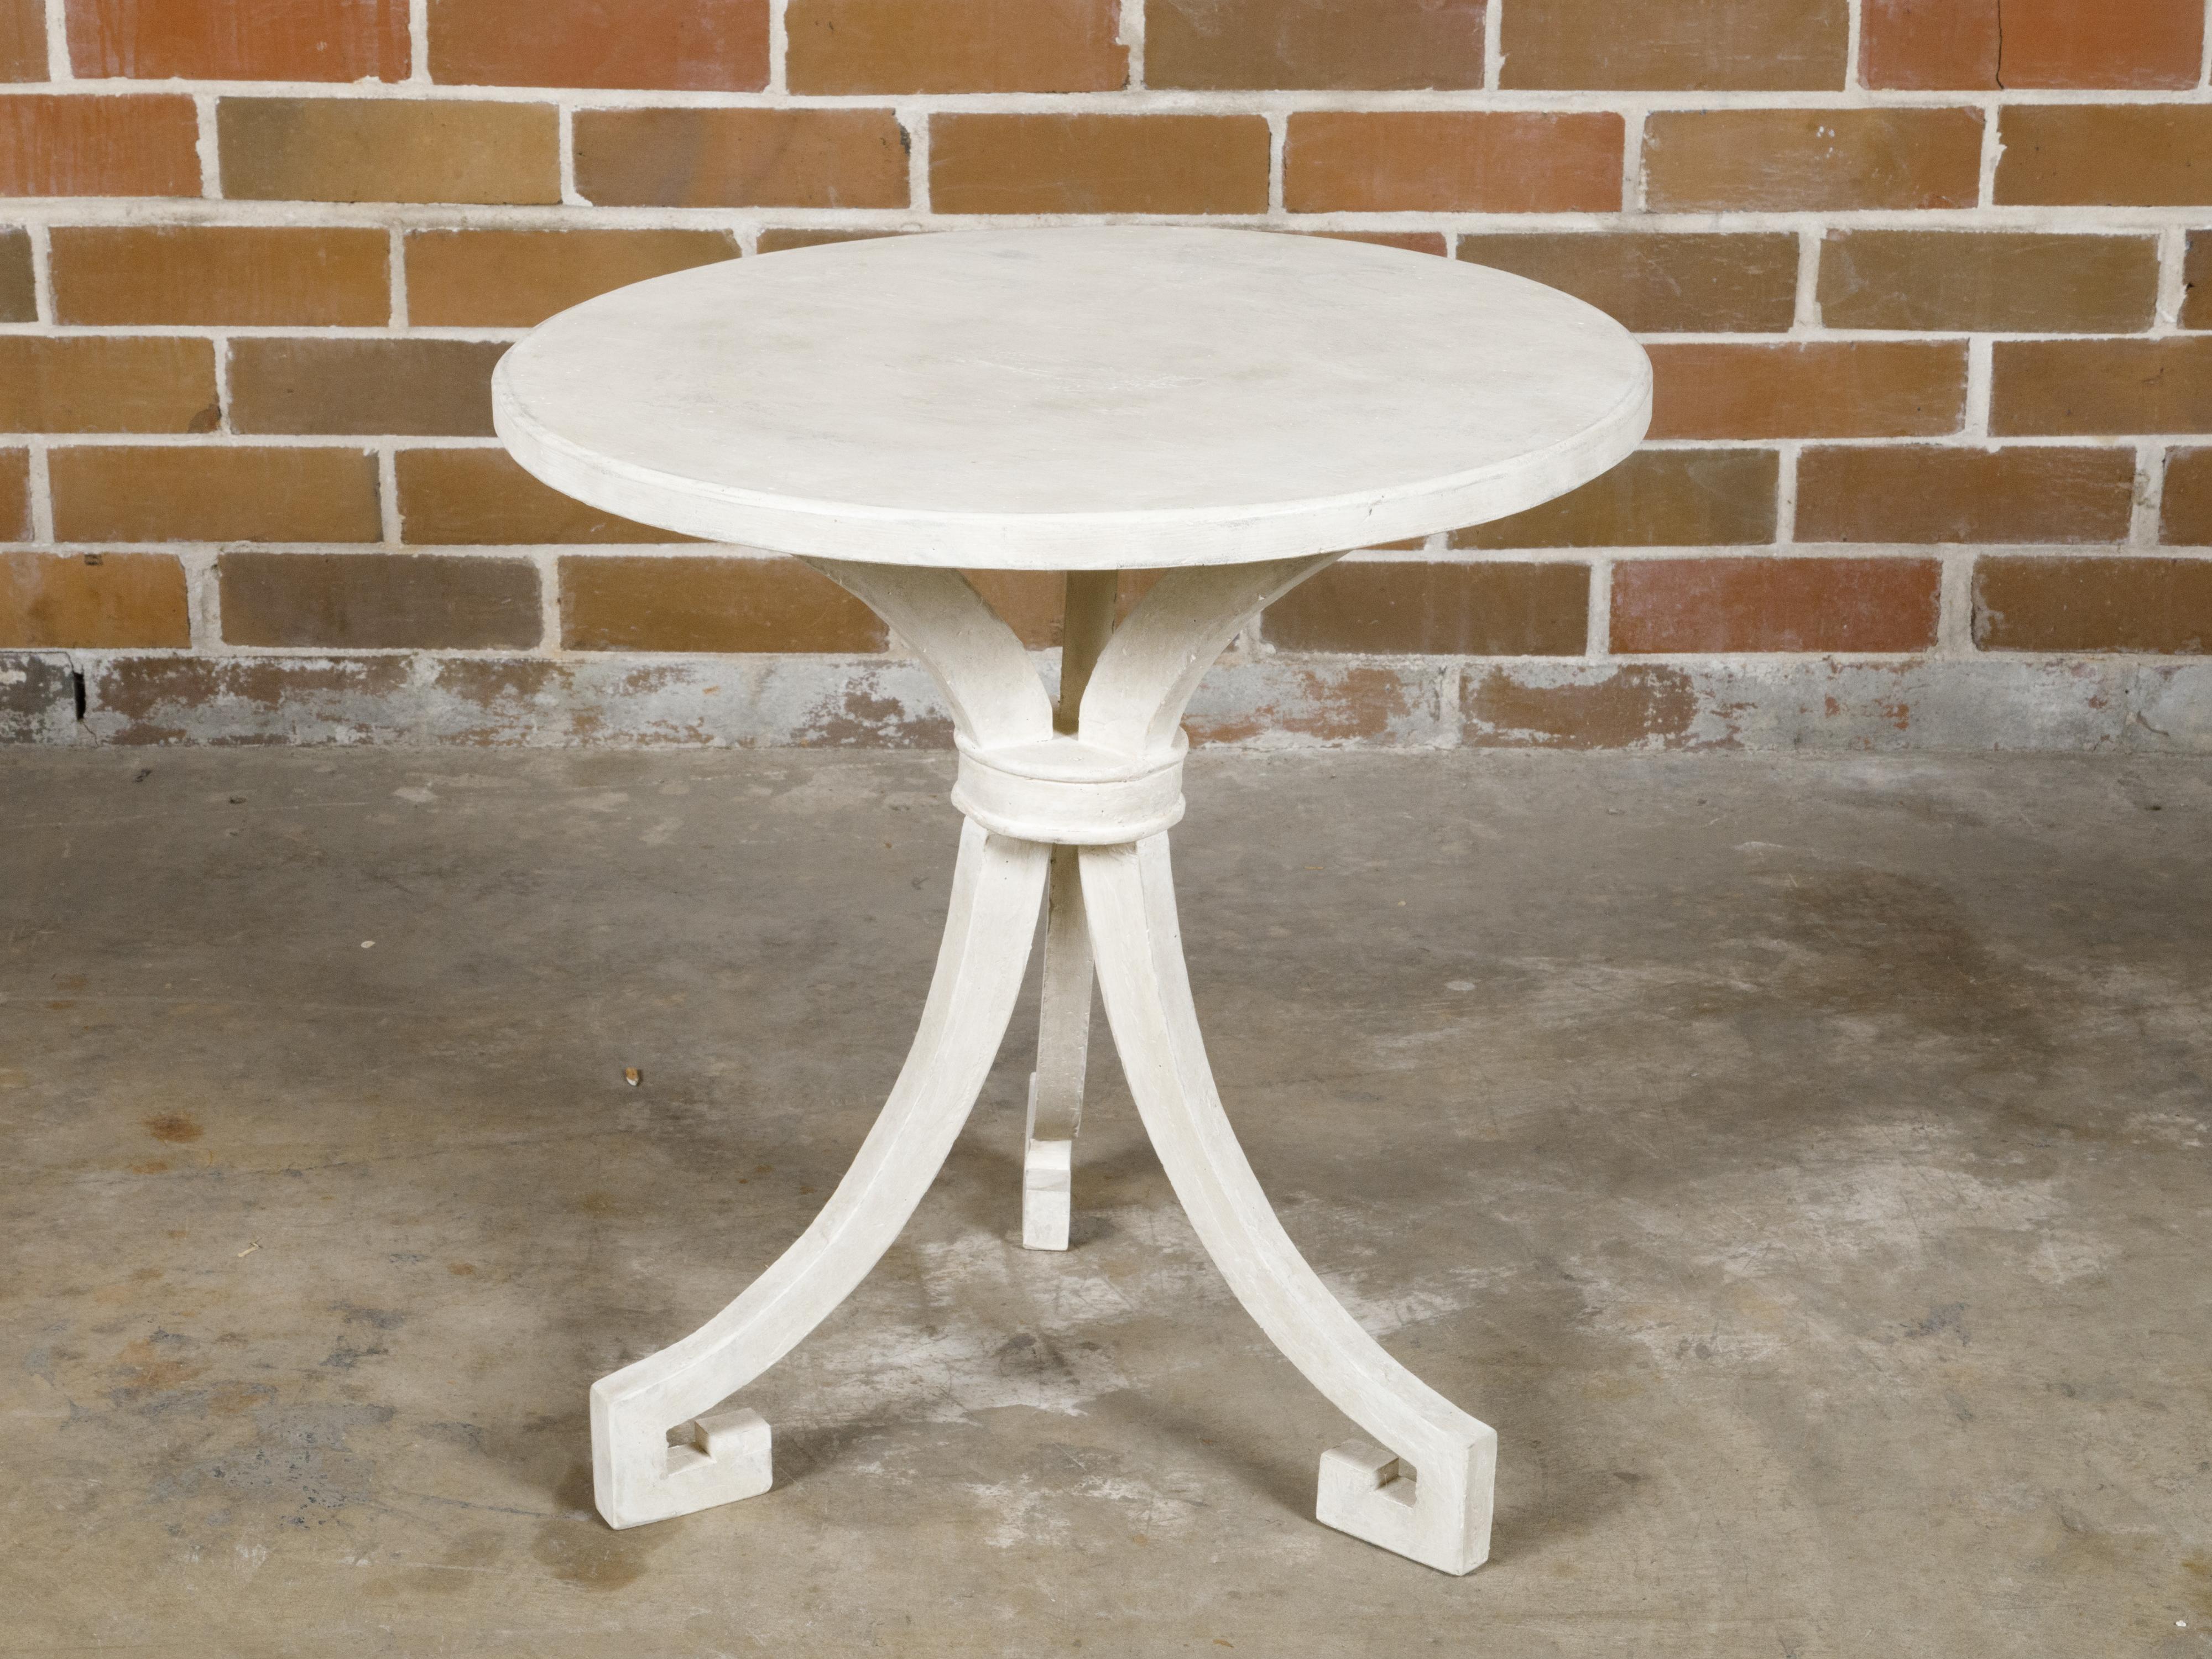 An Italian wooden side table with white painted finish, round top and tripod base. This Italian wooden side table exudes a blend of elegance and simplicity, perfect for adding a touch of timeless style to any interior. The table features a white